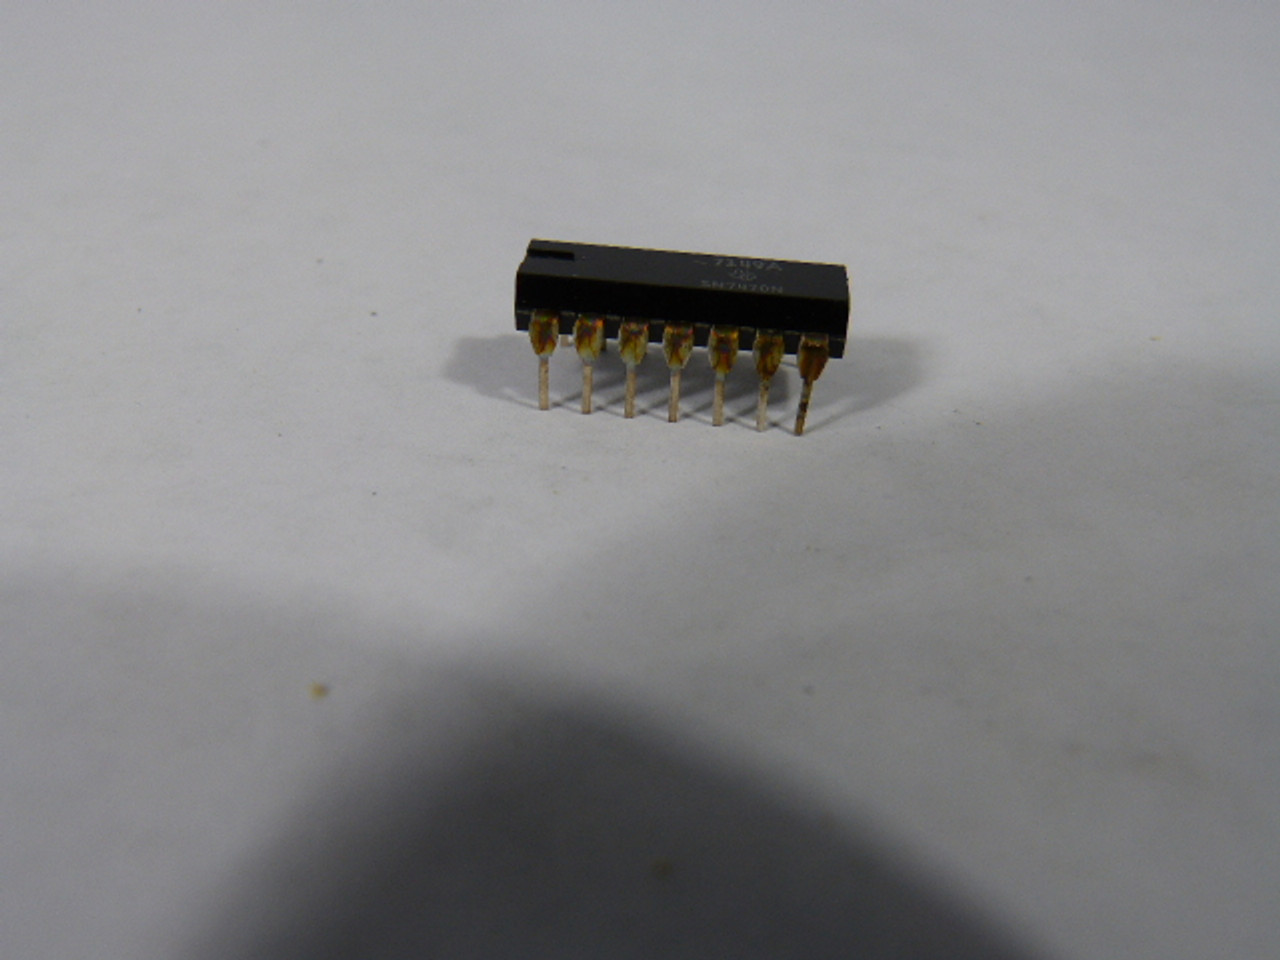 Texas Instruments SN7470N Plastic Dipped 14 Pin Integrated Circuit USED